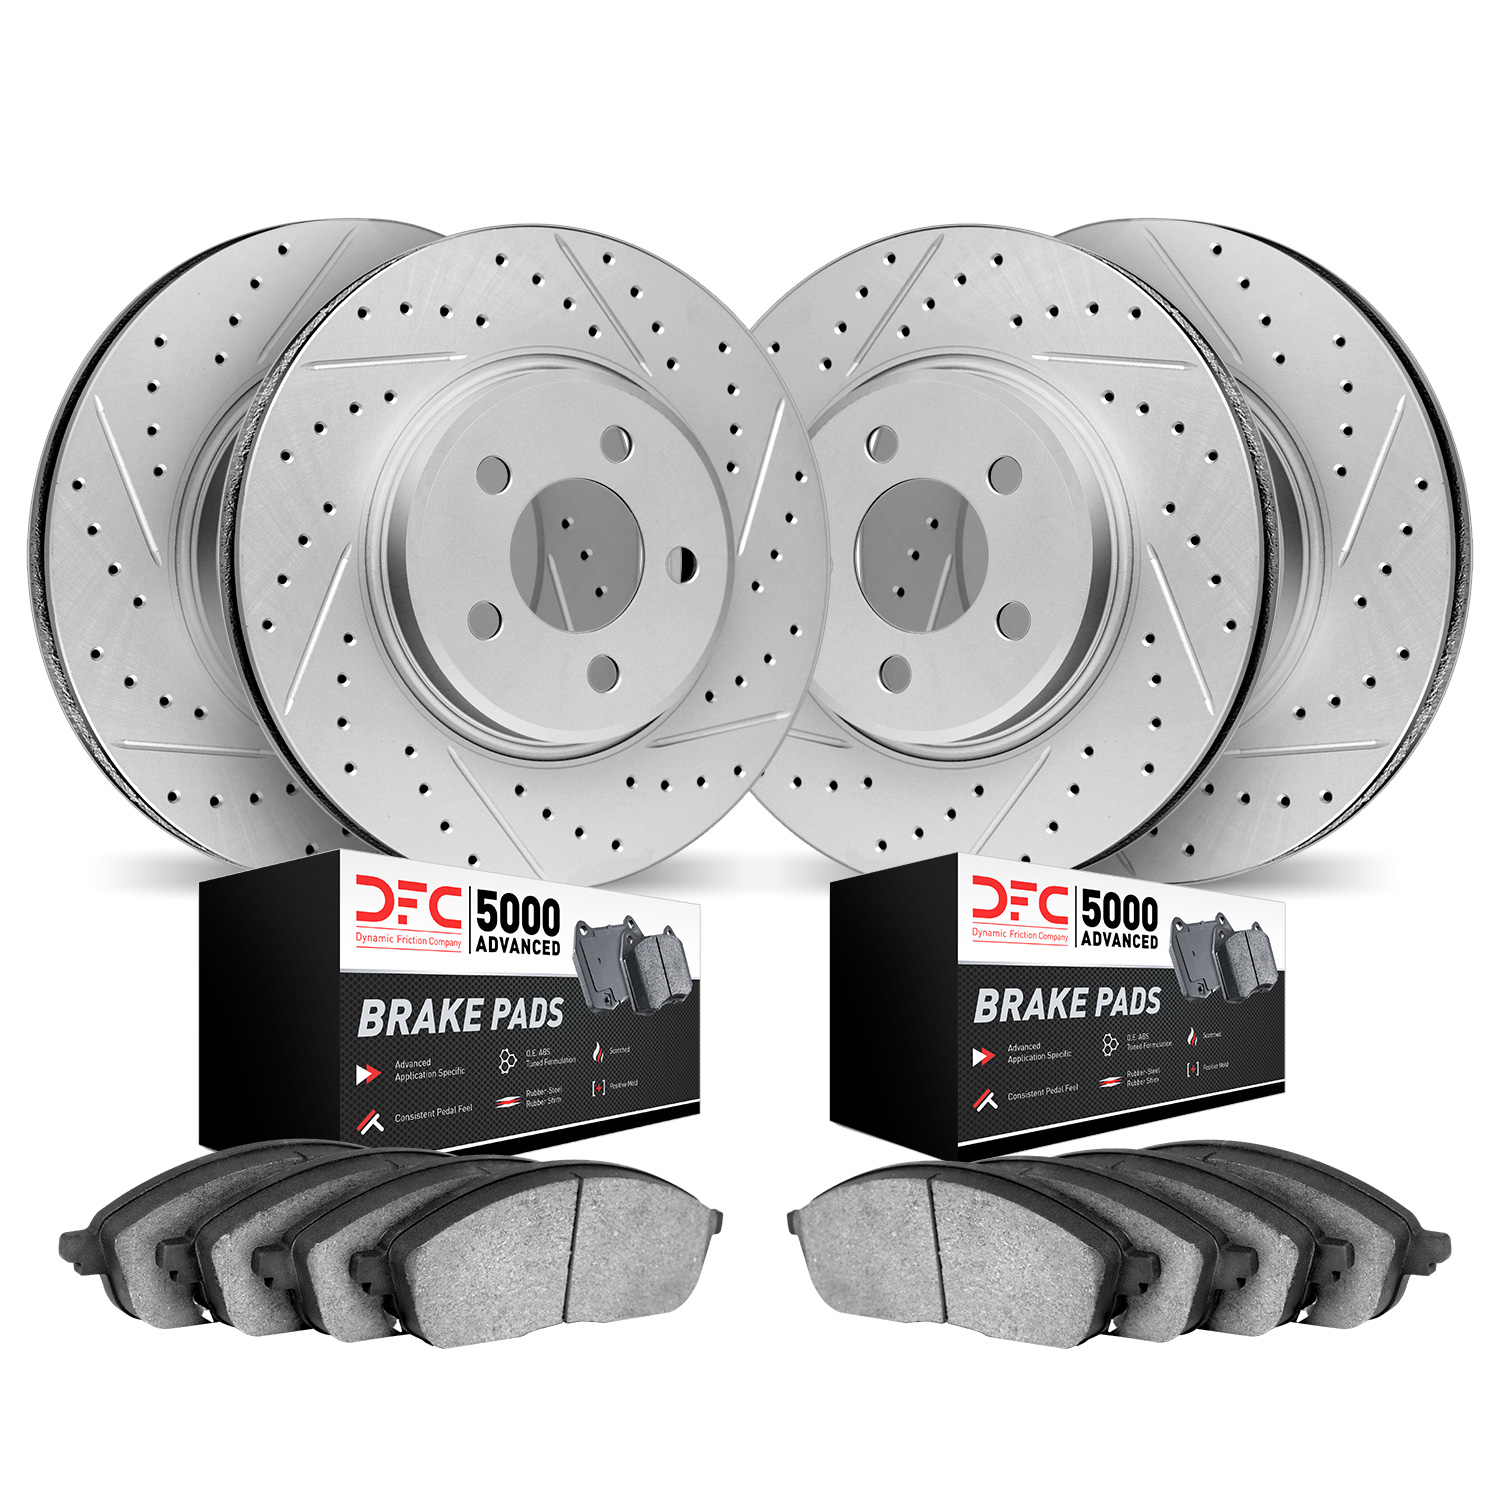 2504-11002 Geoperformance Drilled/Slotted Rotors w/5000 Advanced Brake Pads Kit, 2010-2016 Land Rover, Position: Front and Rear